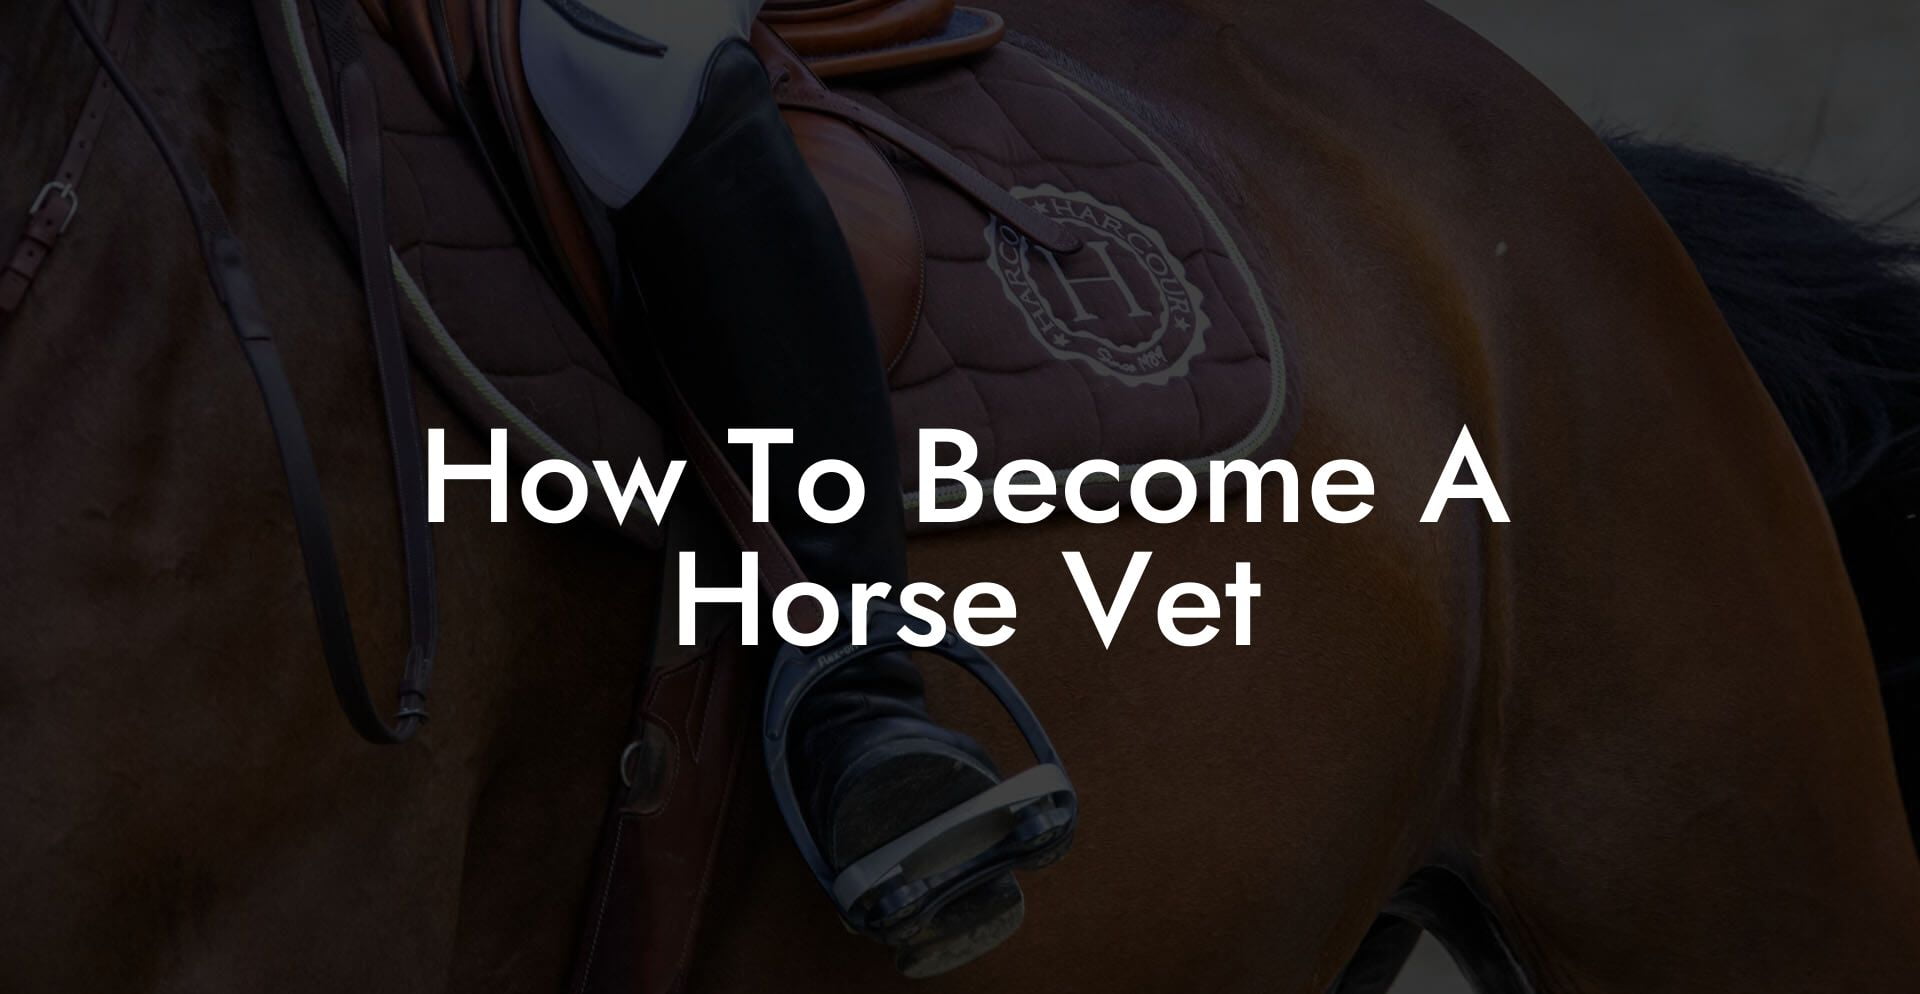 How To Become A Horse Vet